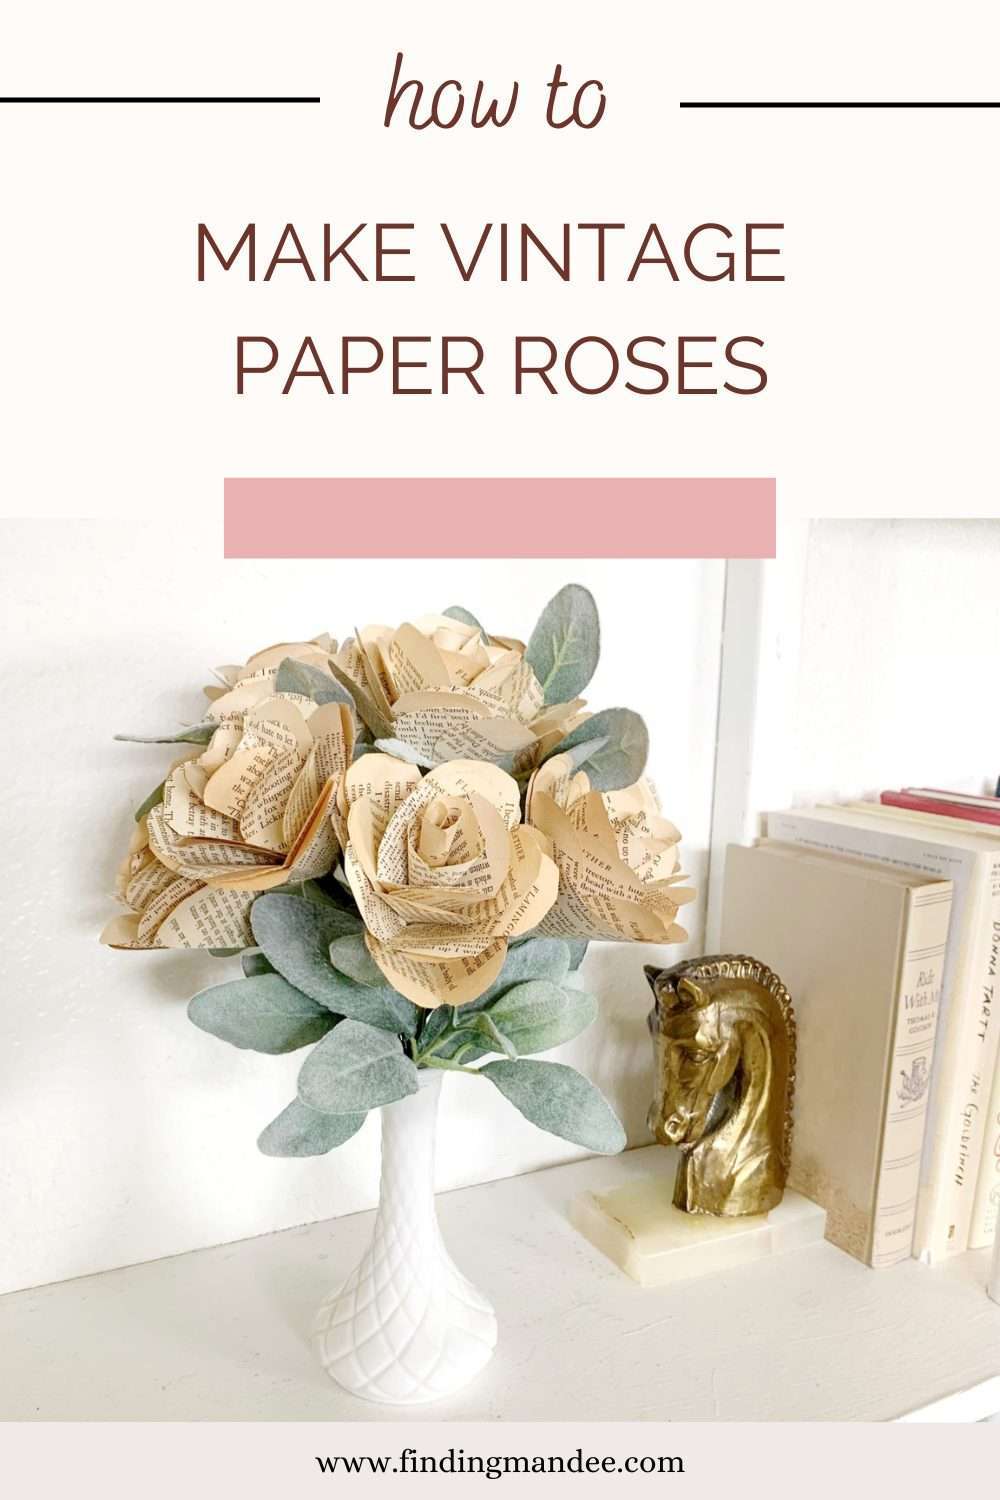 How to Make Vintage Paper Roses out of Old Books | Finding Mandee